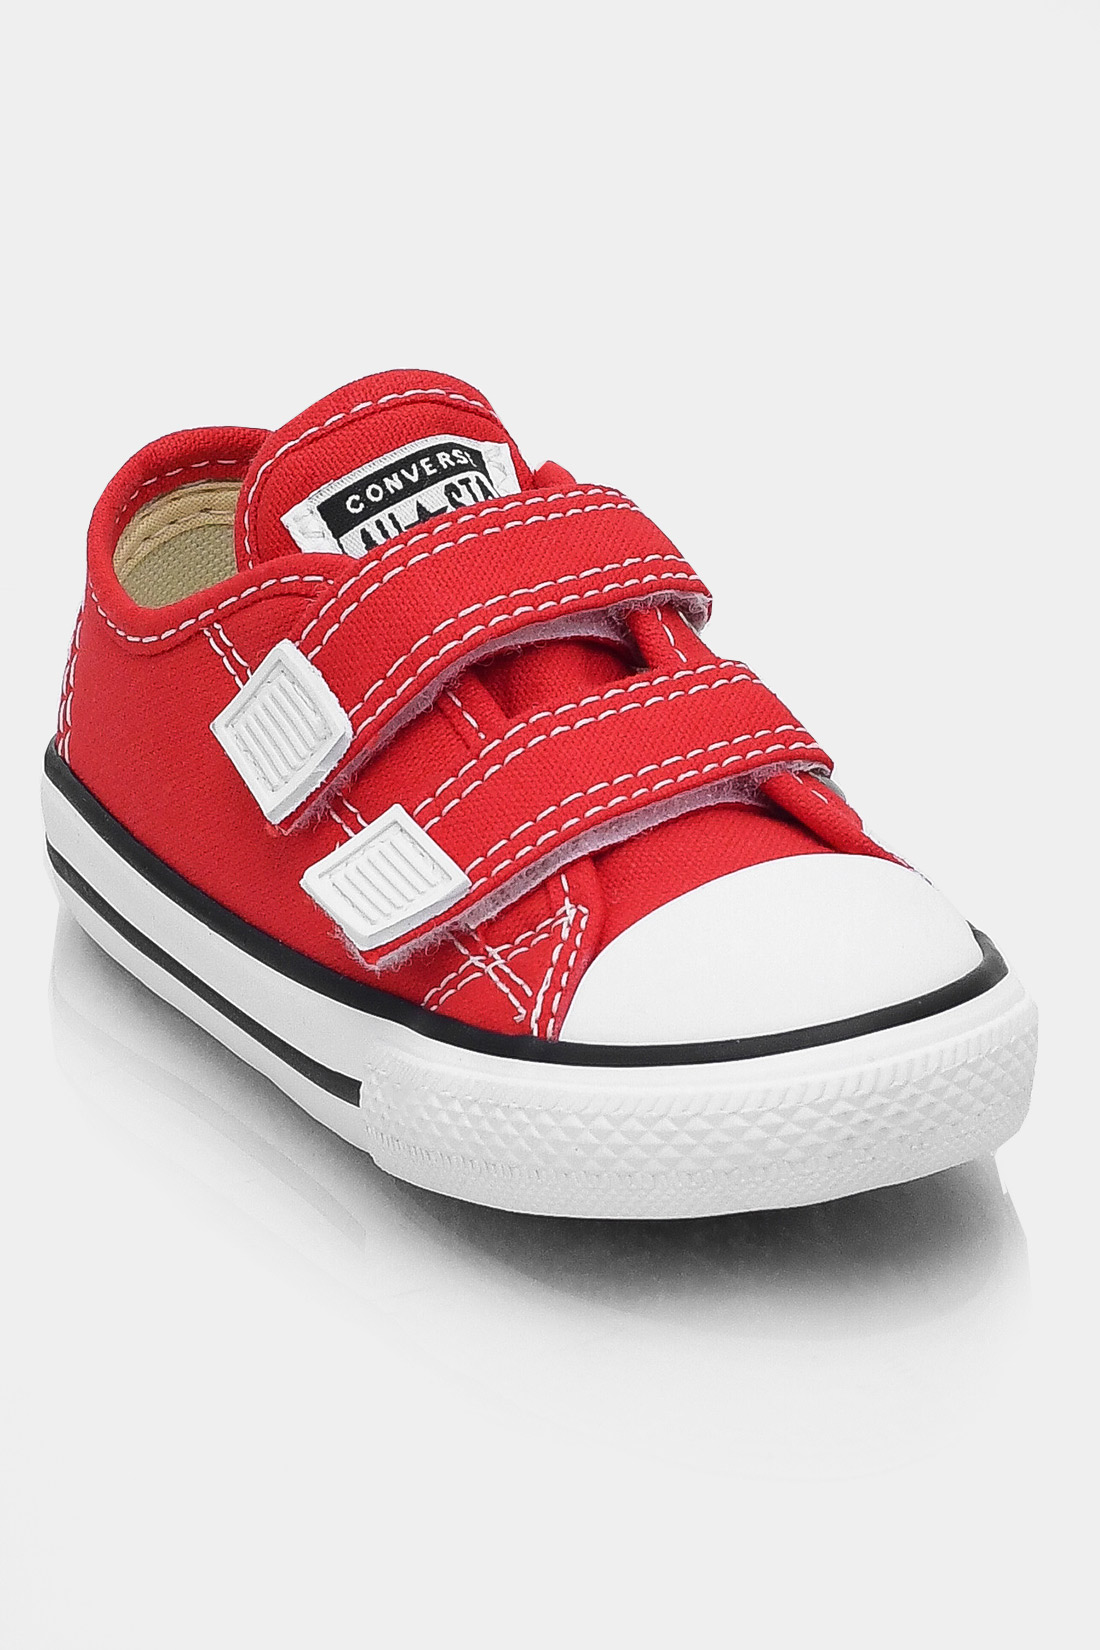 Tenis Casual All Star Kids Chuck Taylor Velcro